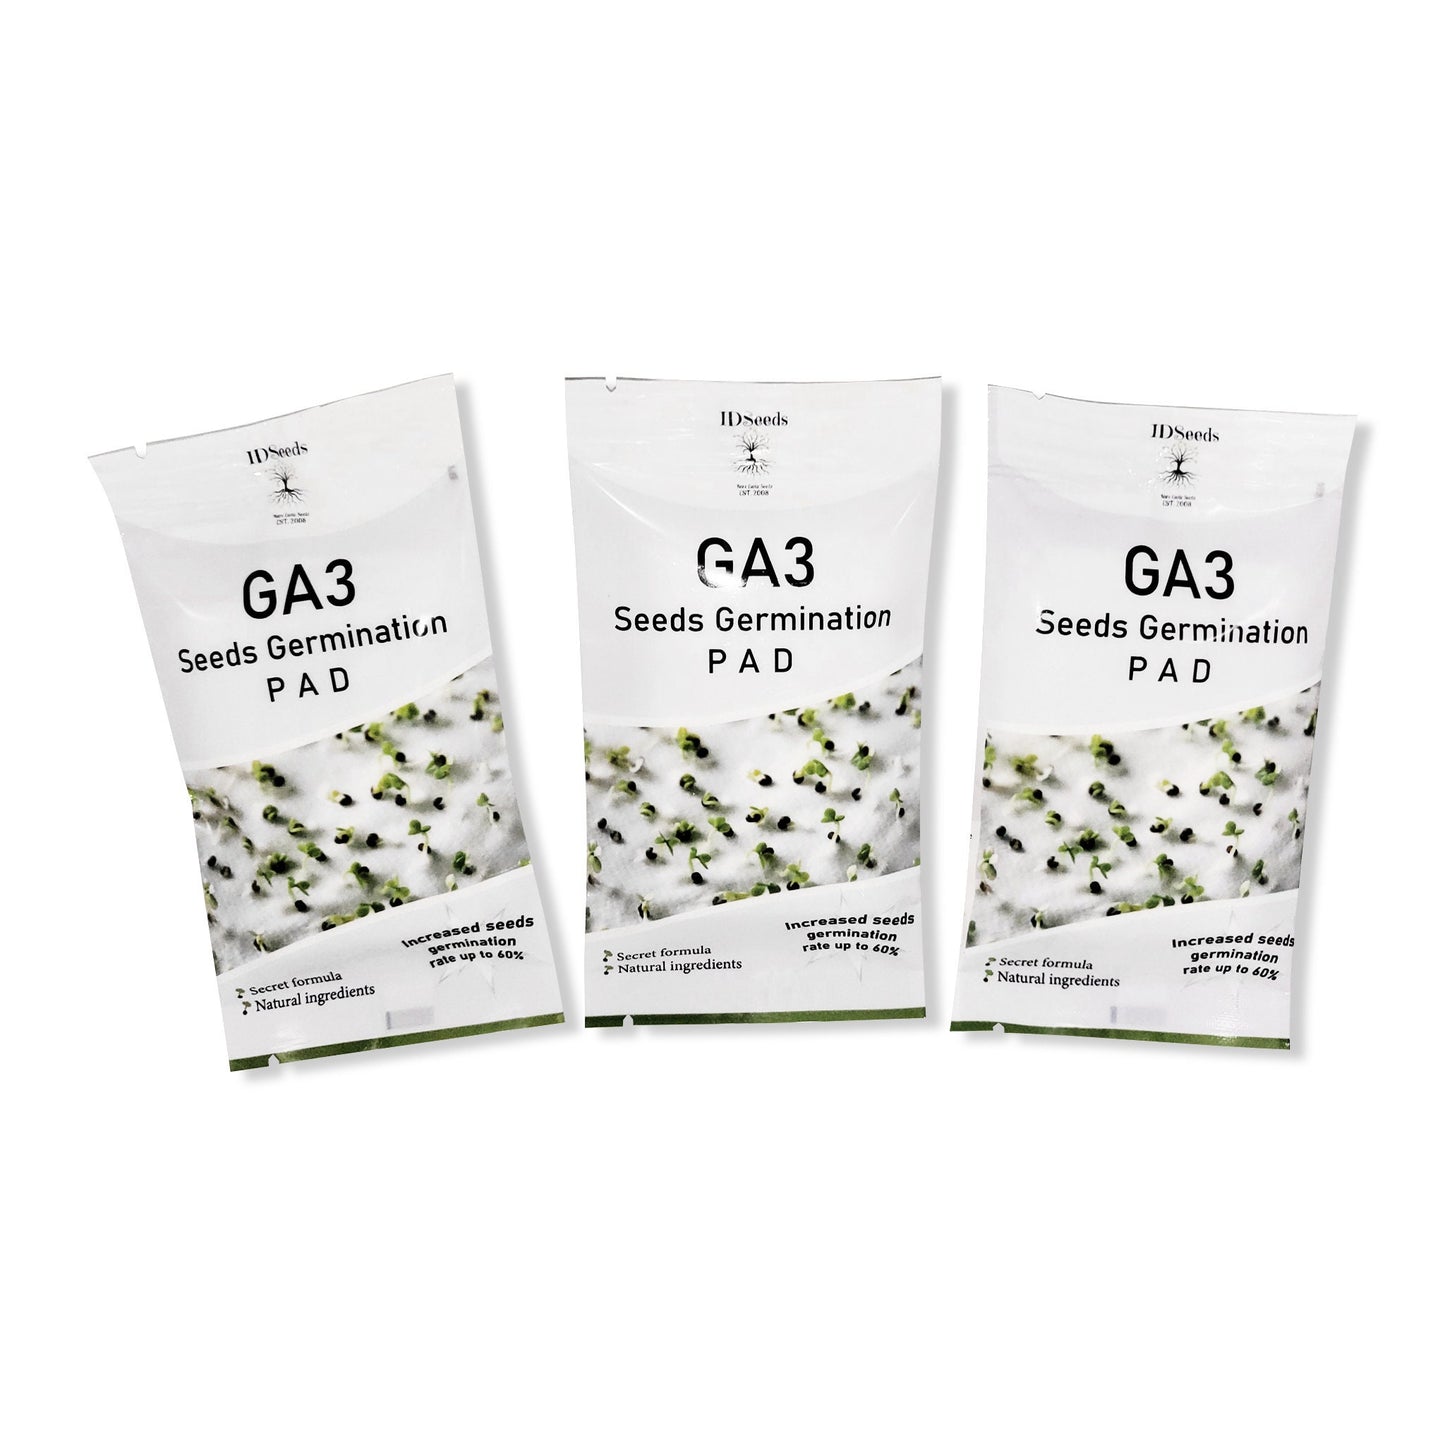 GA3 Gibberellic Acid Seeds Germination Pad - Increase Seeds Germination Rate Up To 60% - Natural Product - Perfect For Bonsai - Protea